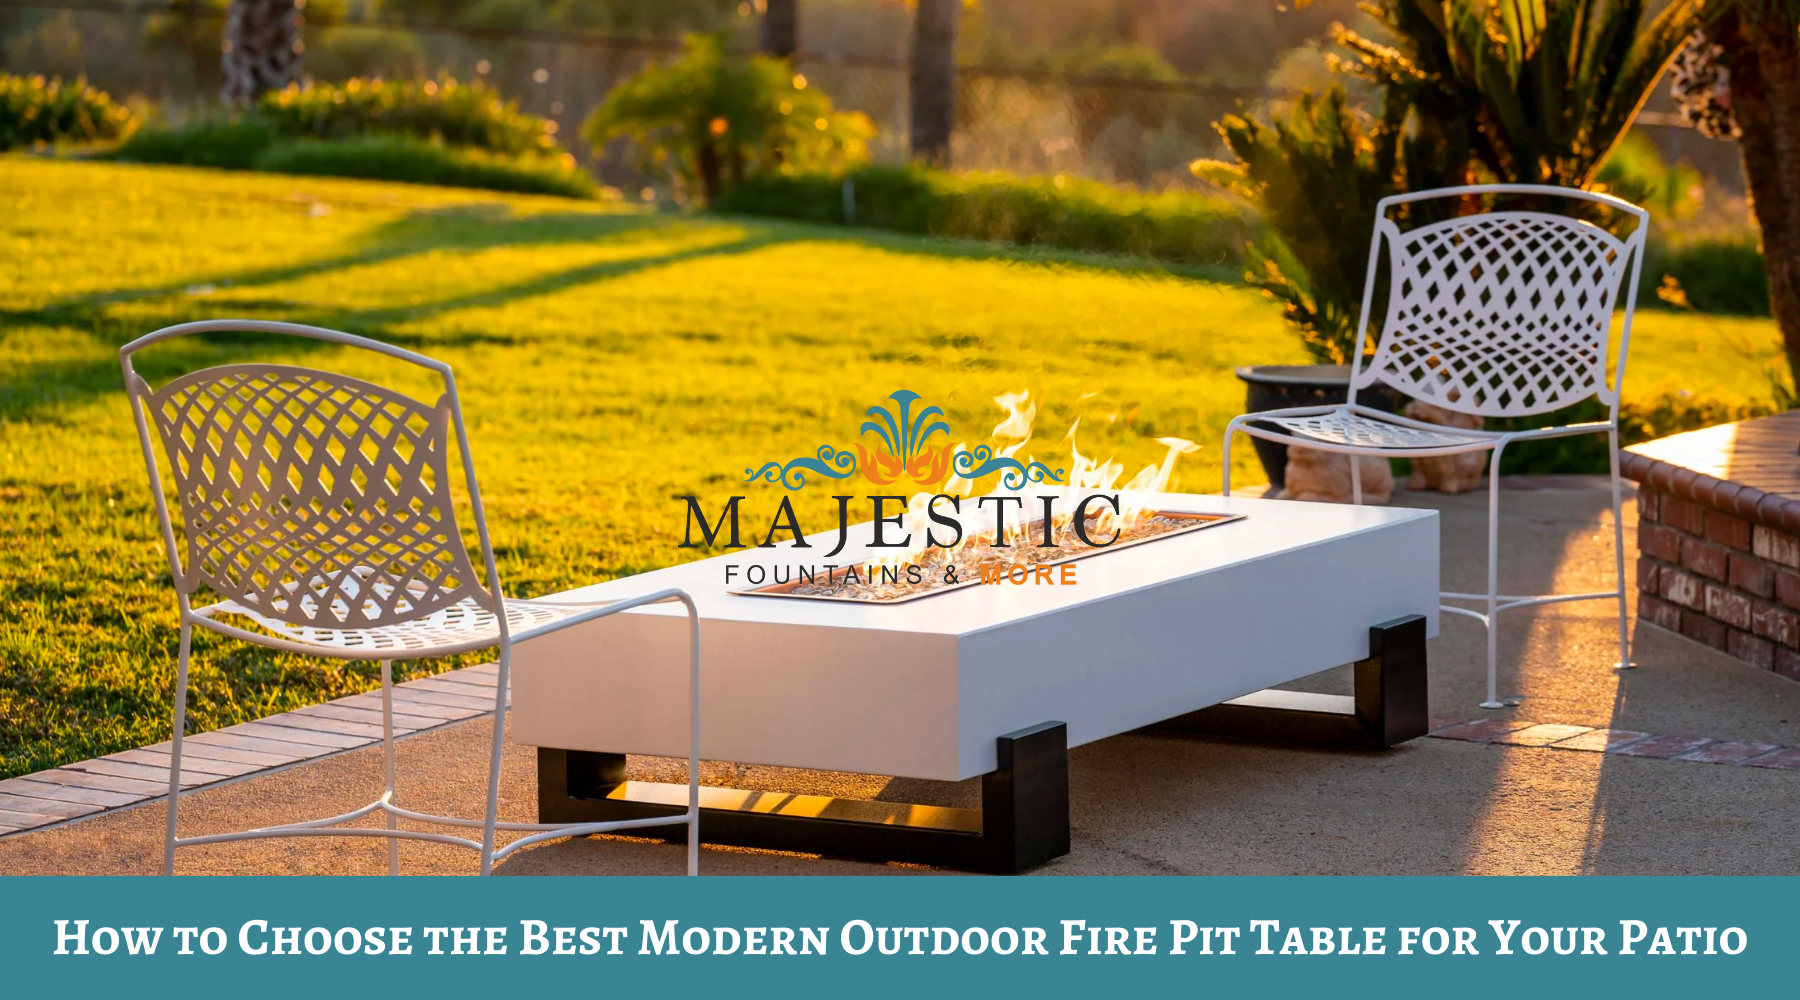 How to Choose the Best Modern Outdoor Fire Pit Table for Your Patio